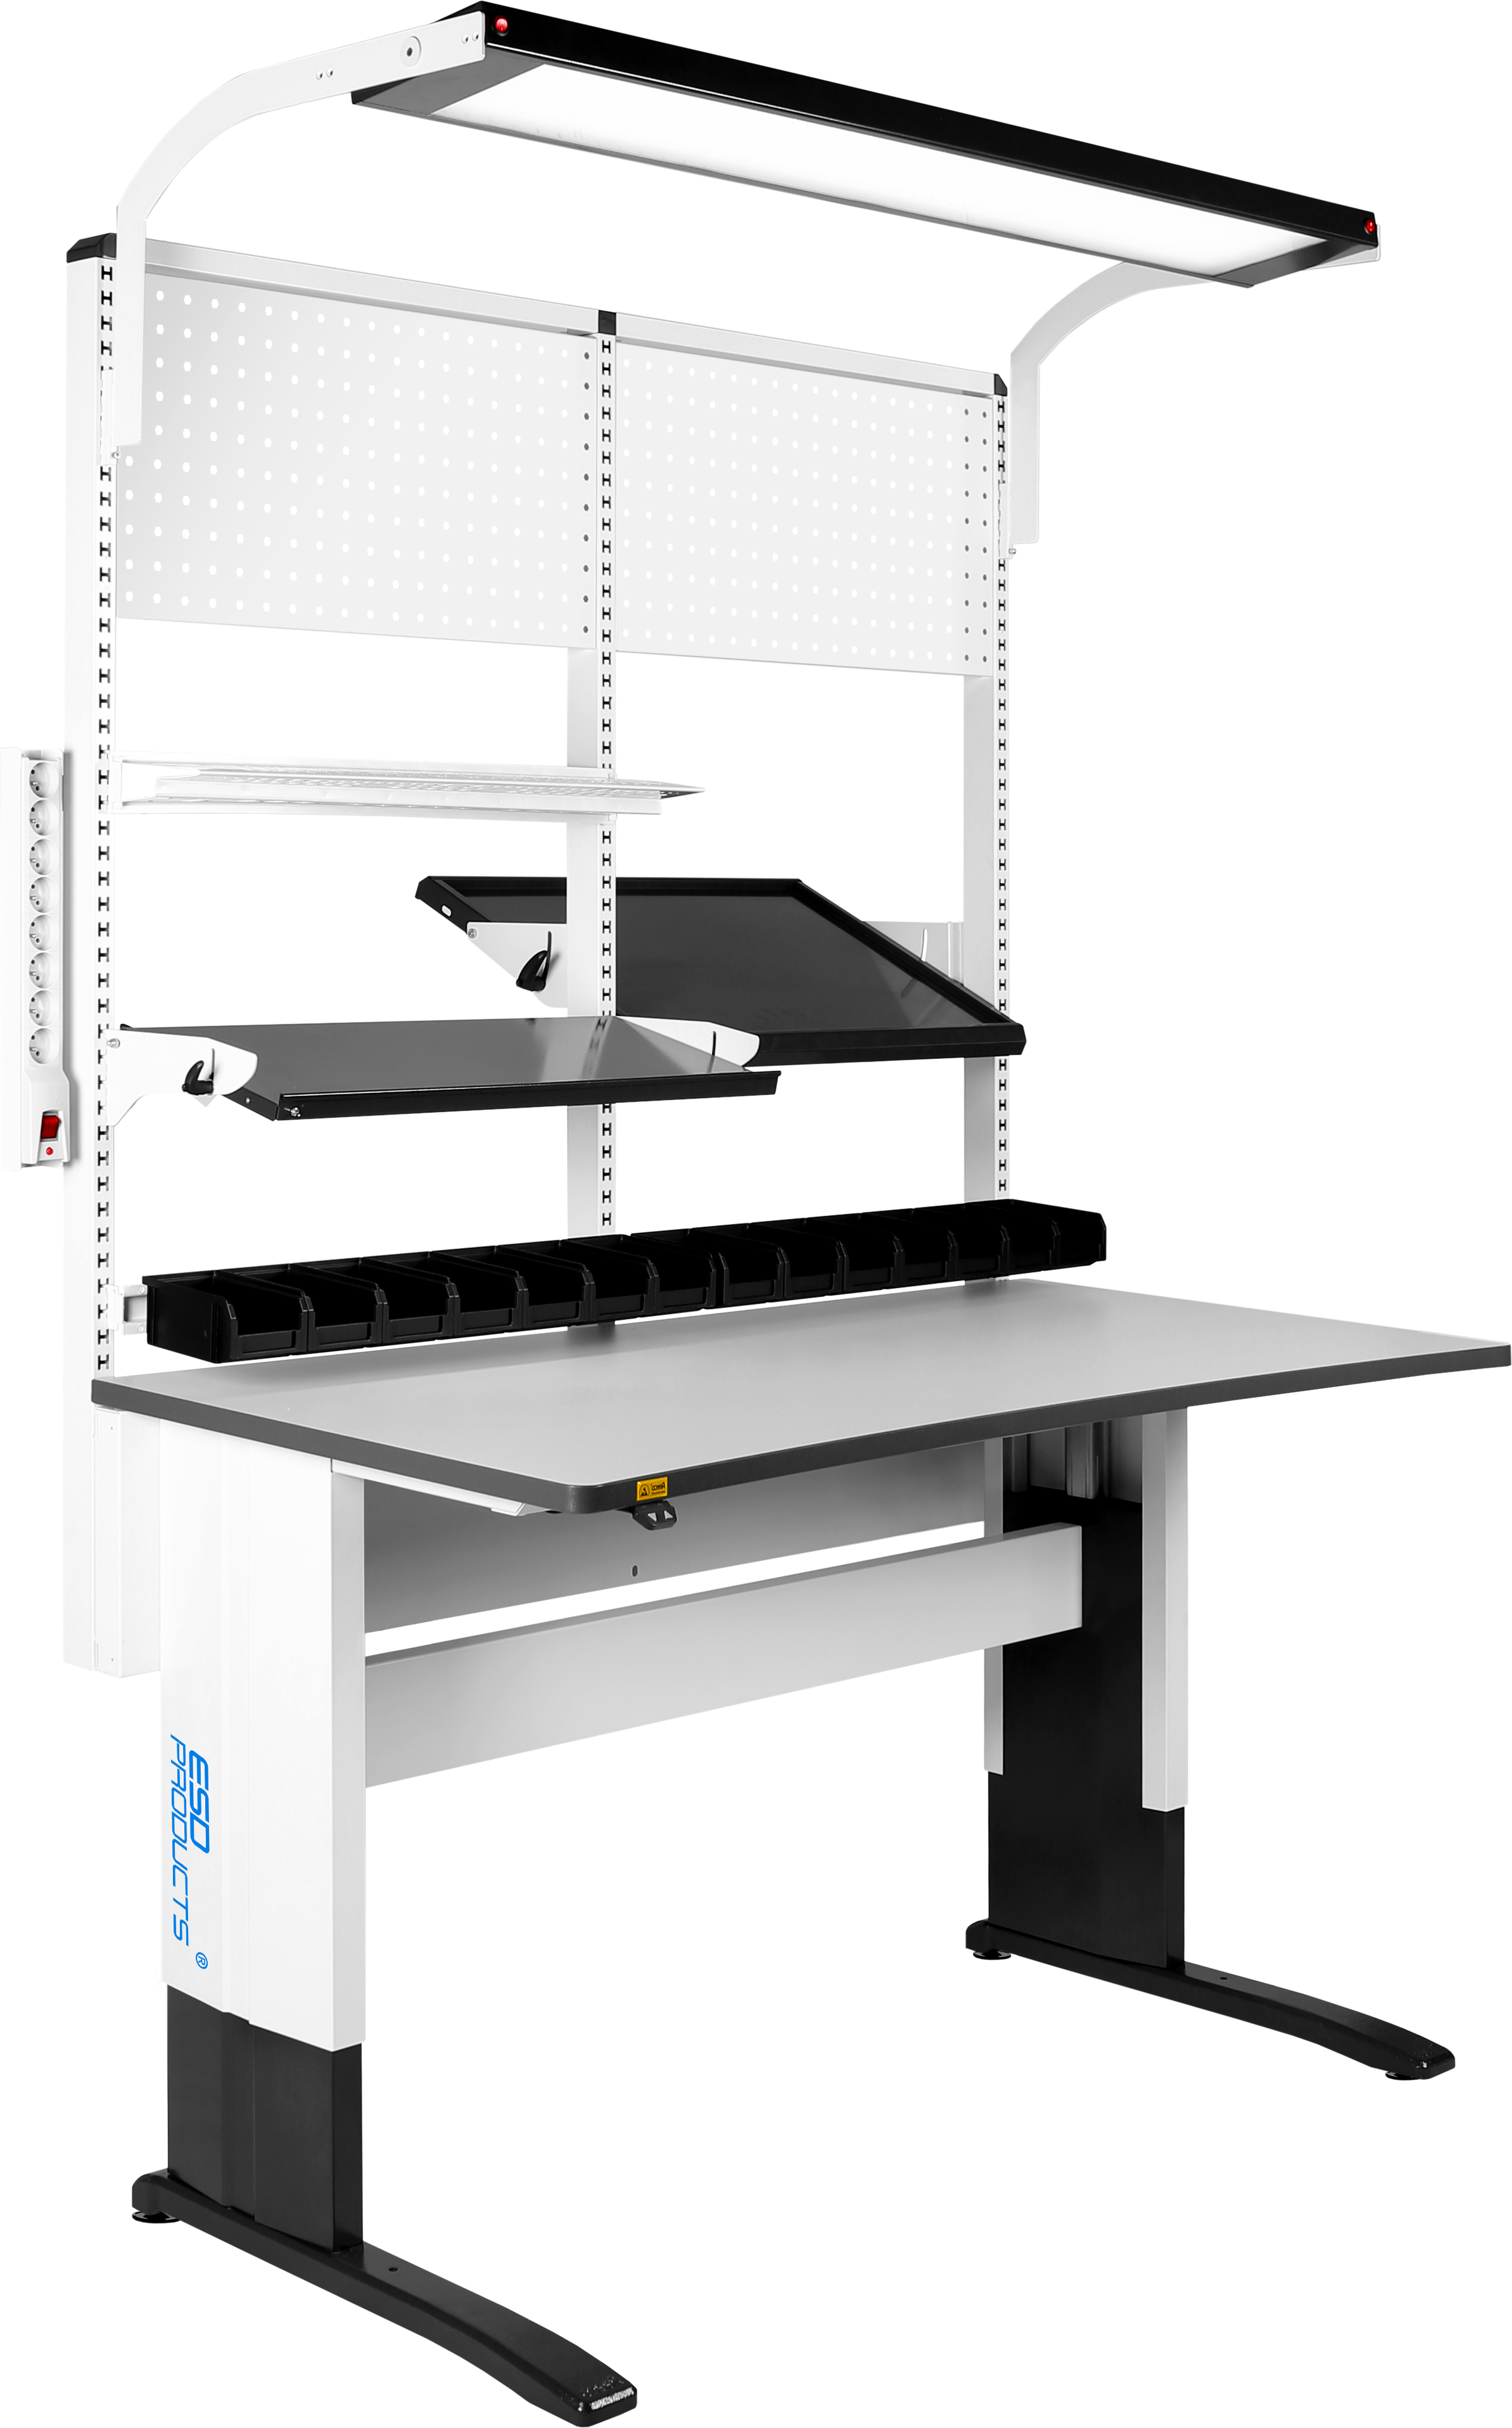 Anti-Static-Workstation-Electrically-Adjustable-Standard-Rectangular-Table-Top-Reeco-Robert-1200-x-750-mm-ESD-Products-AES